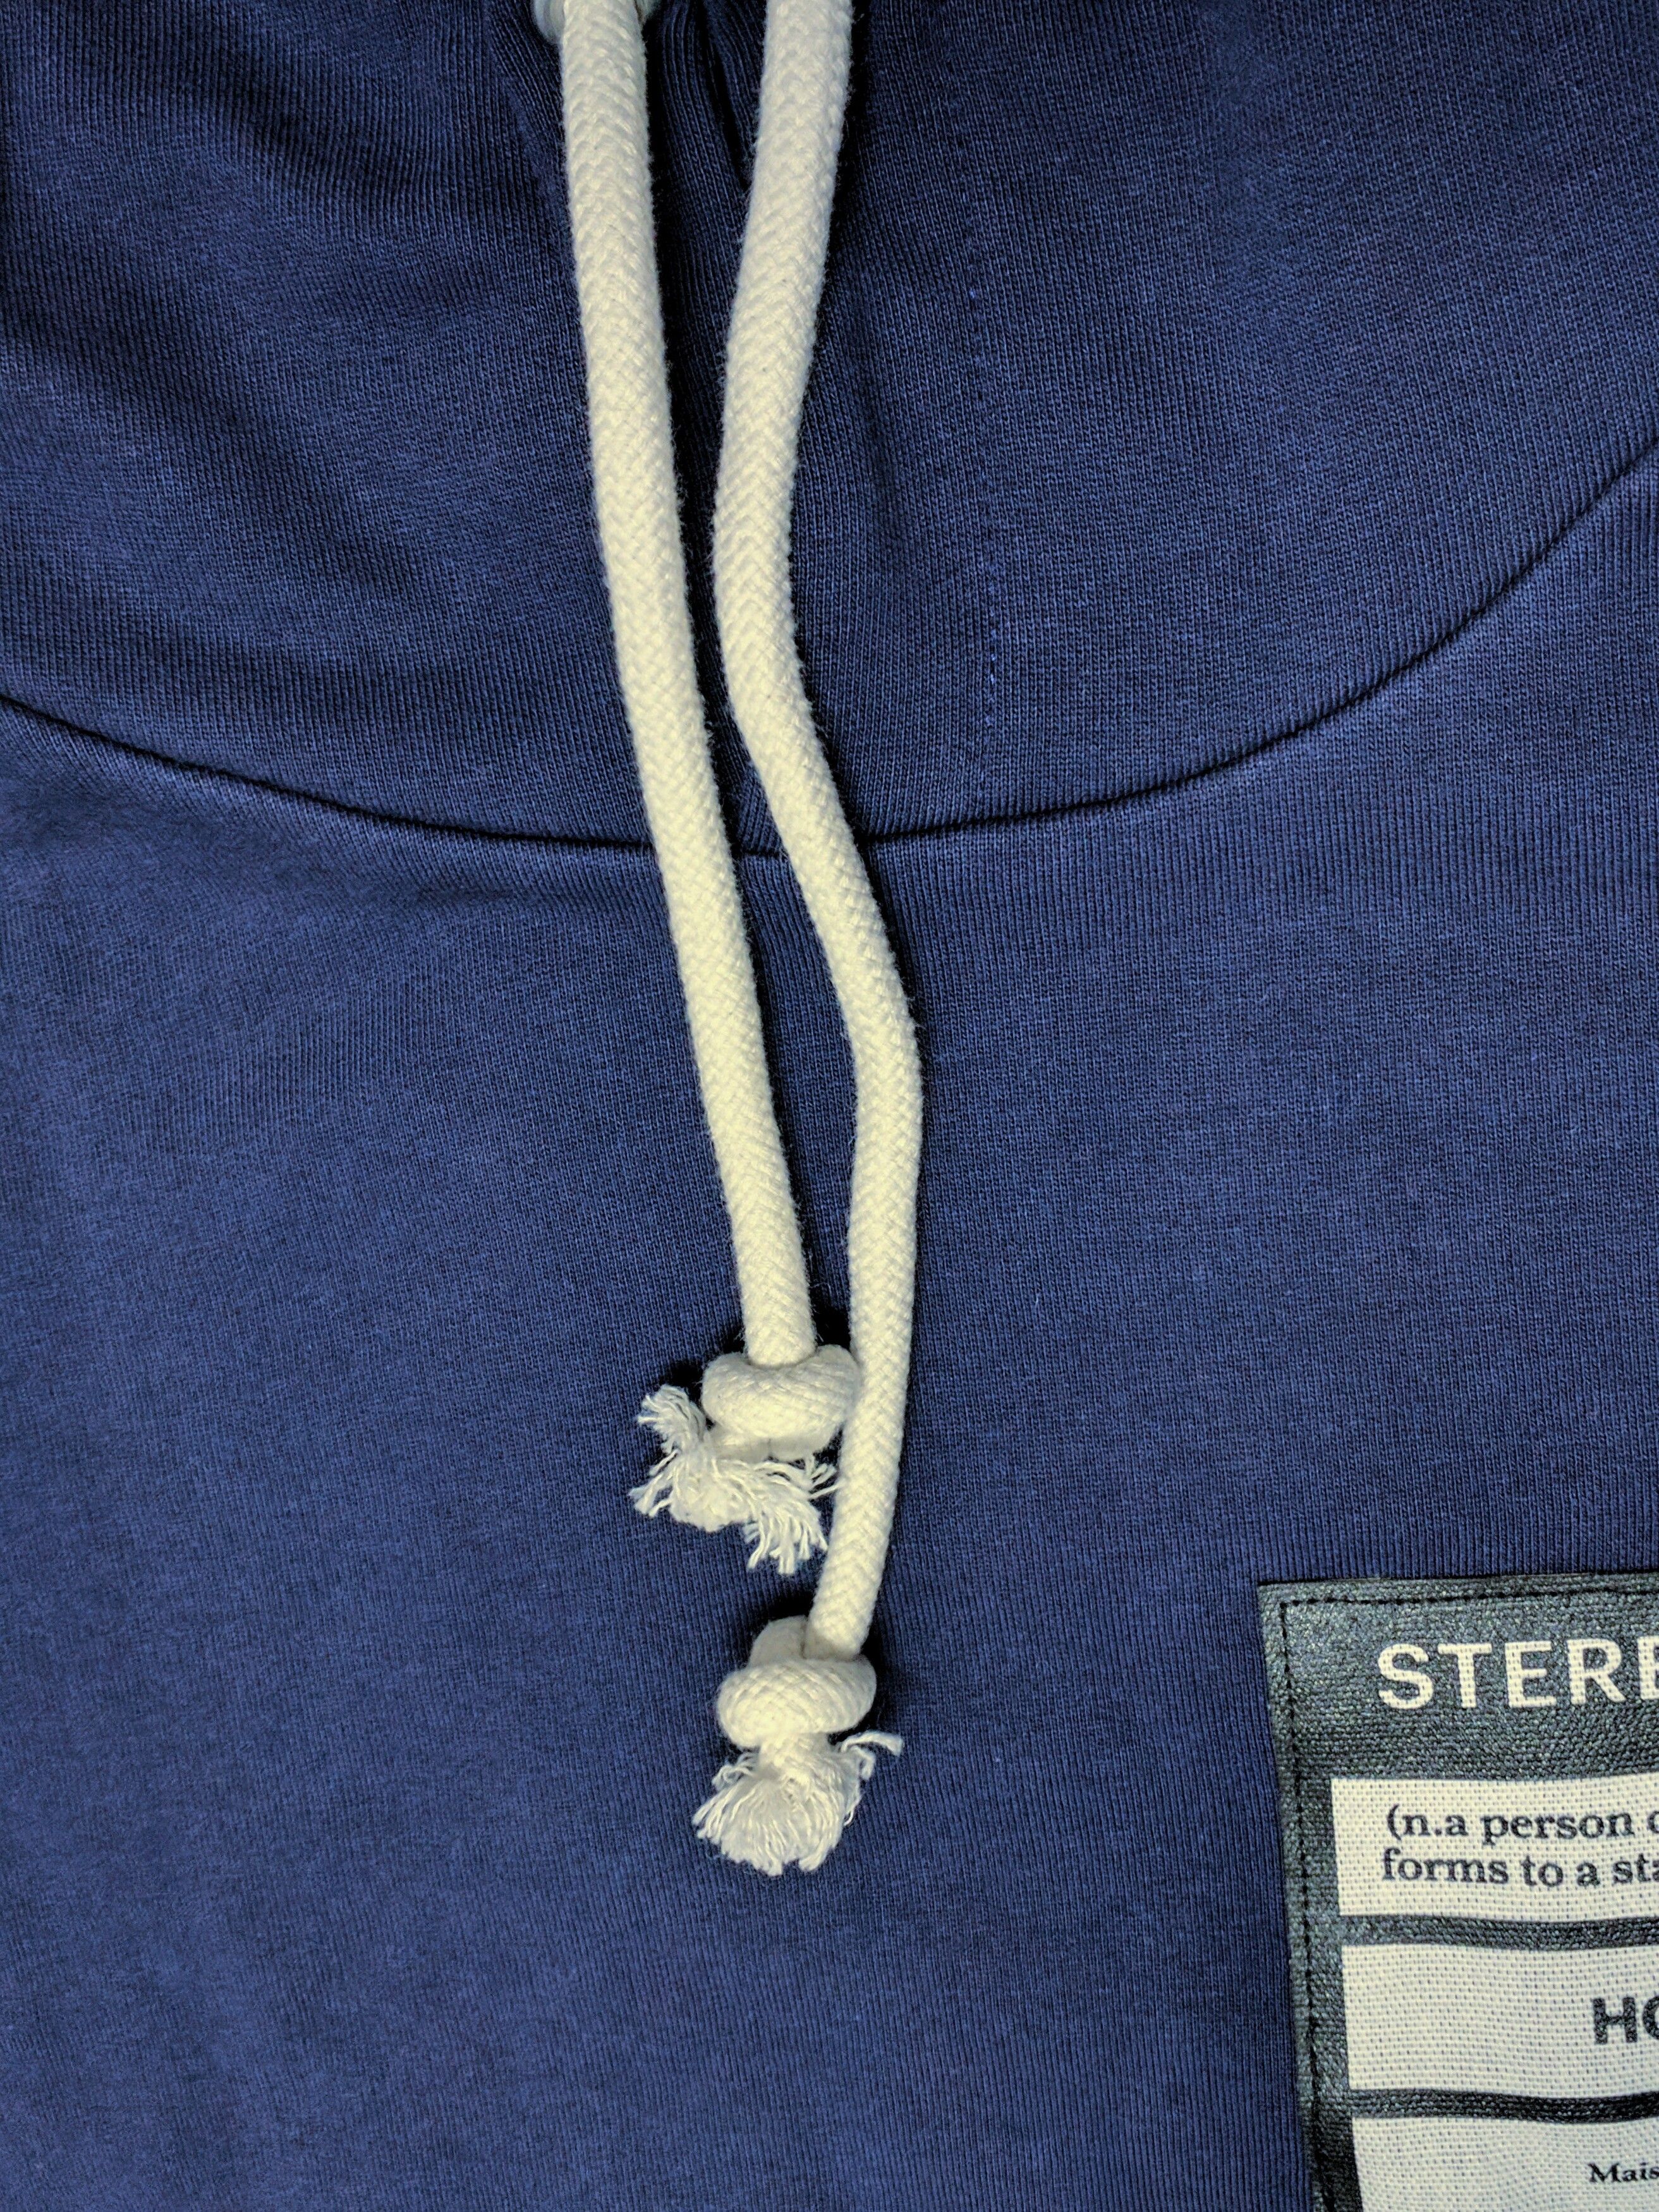 Maison Margiela Stereotype Hoodie Navy Blue 48 MMM Pullover Size US L / EU 52-54 / 3 - 3 Thumbnail